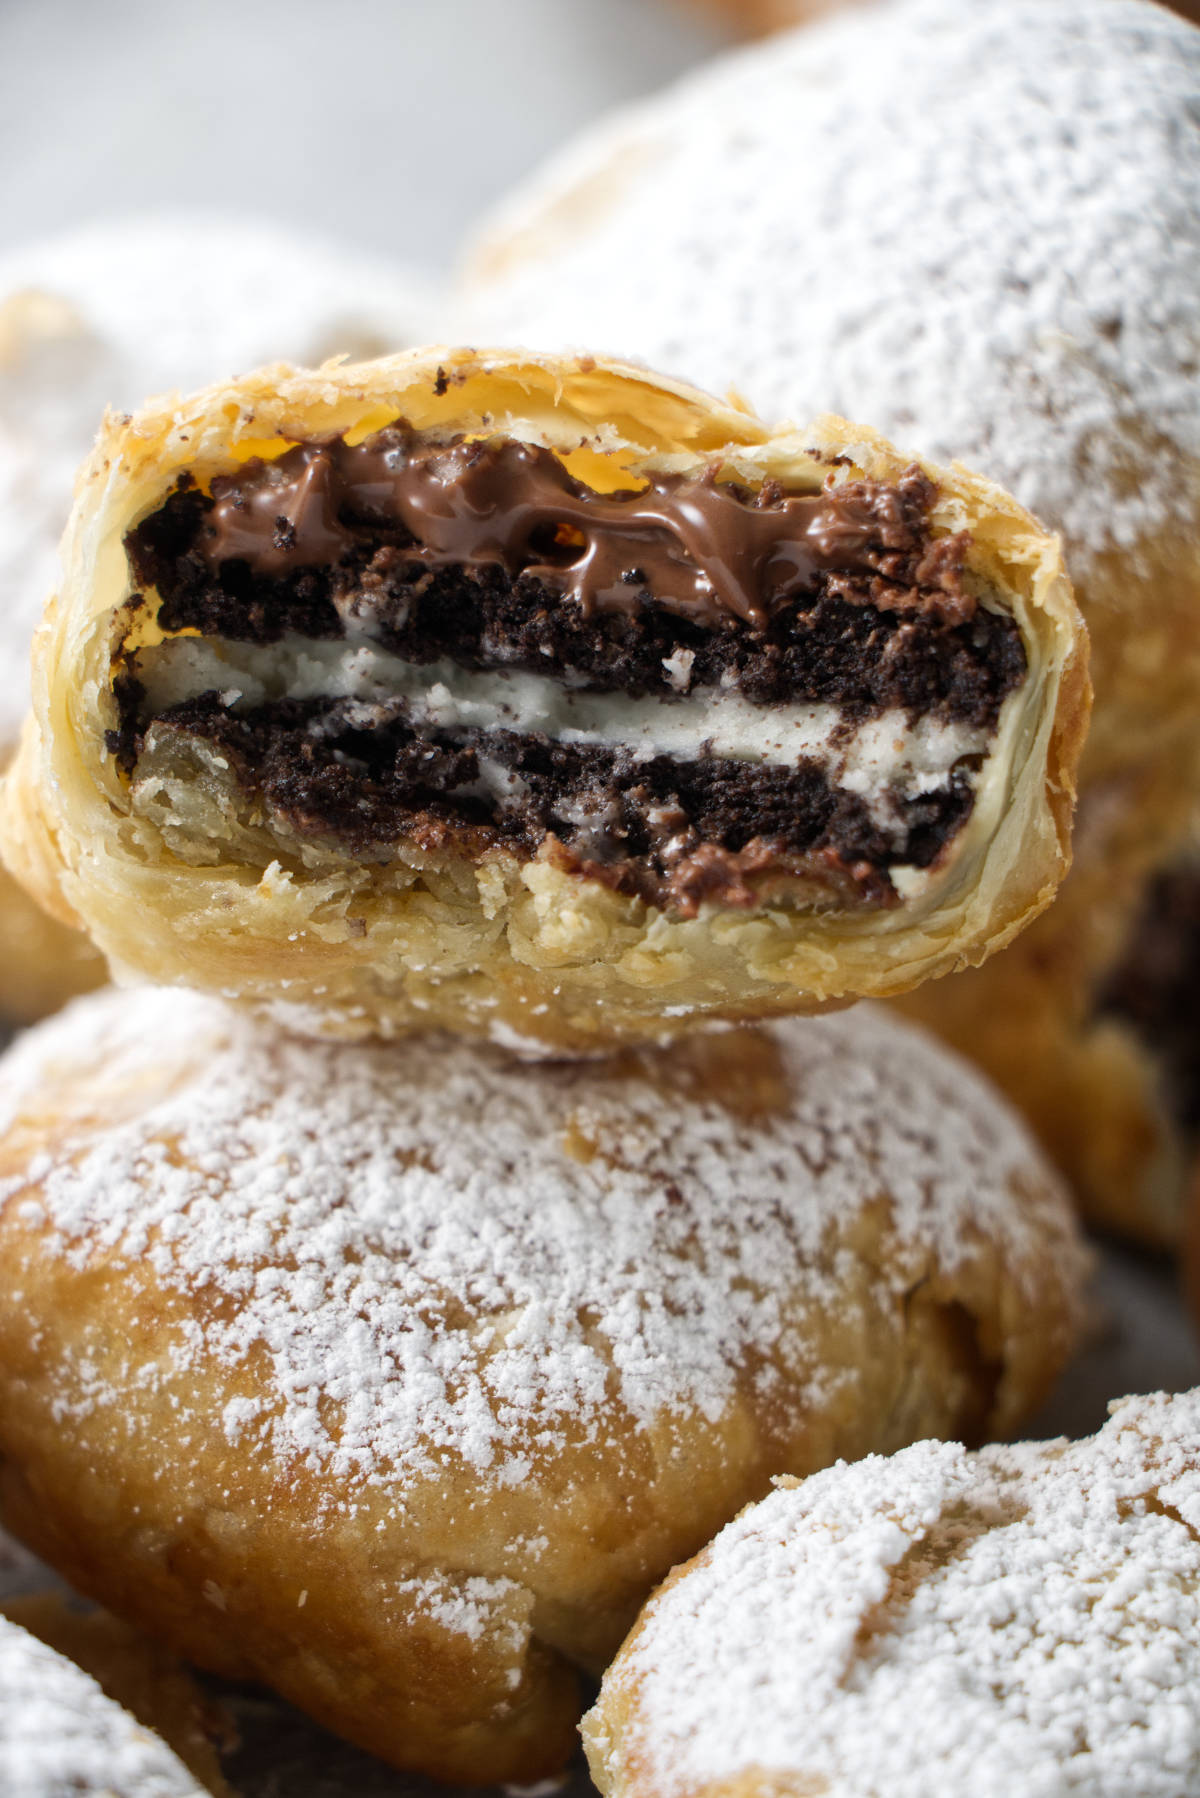 stack of air fried oreos with one in the middle that has been bitten into with nutella oozing out and a crumbly puff pastry shell.